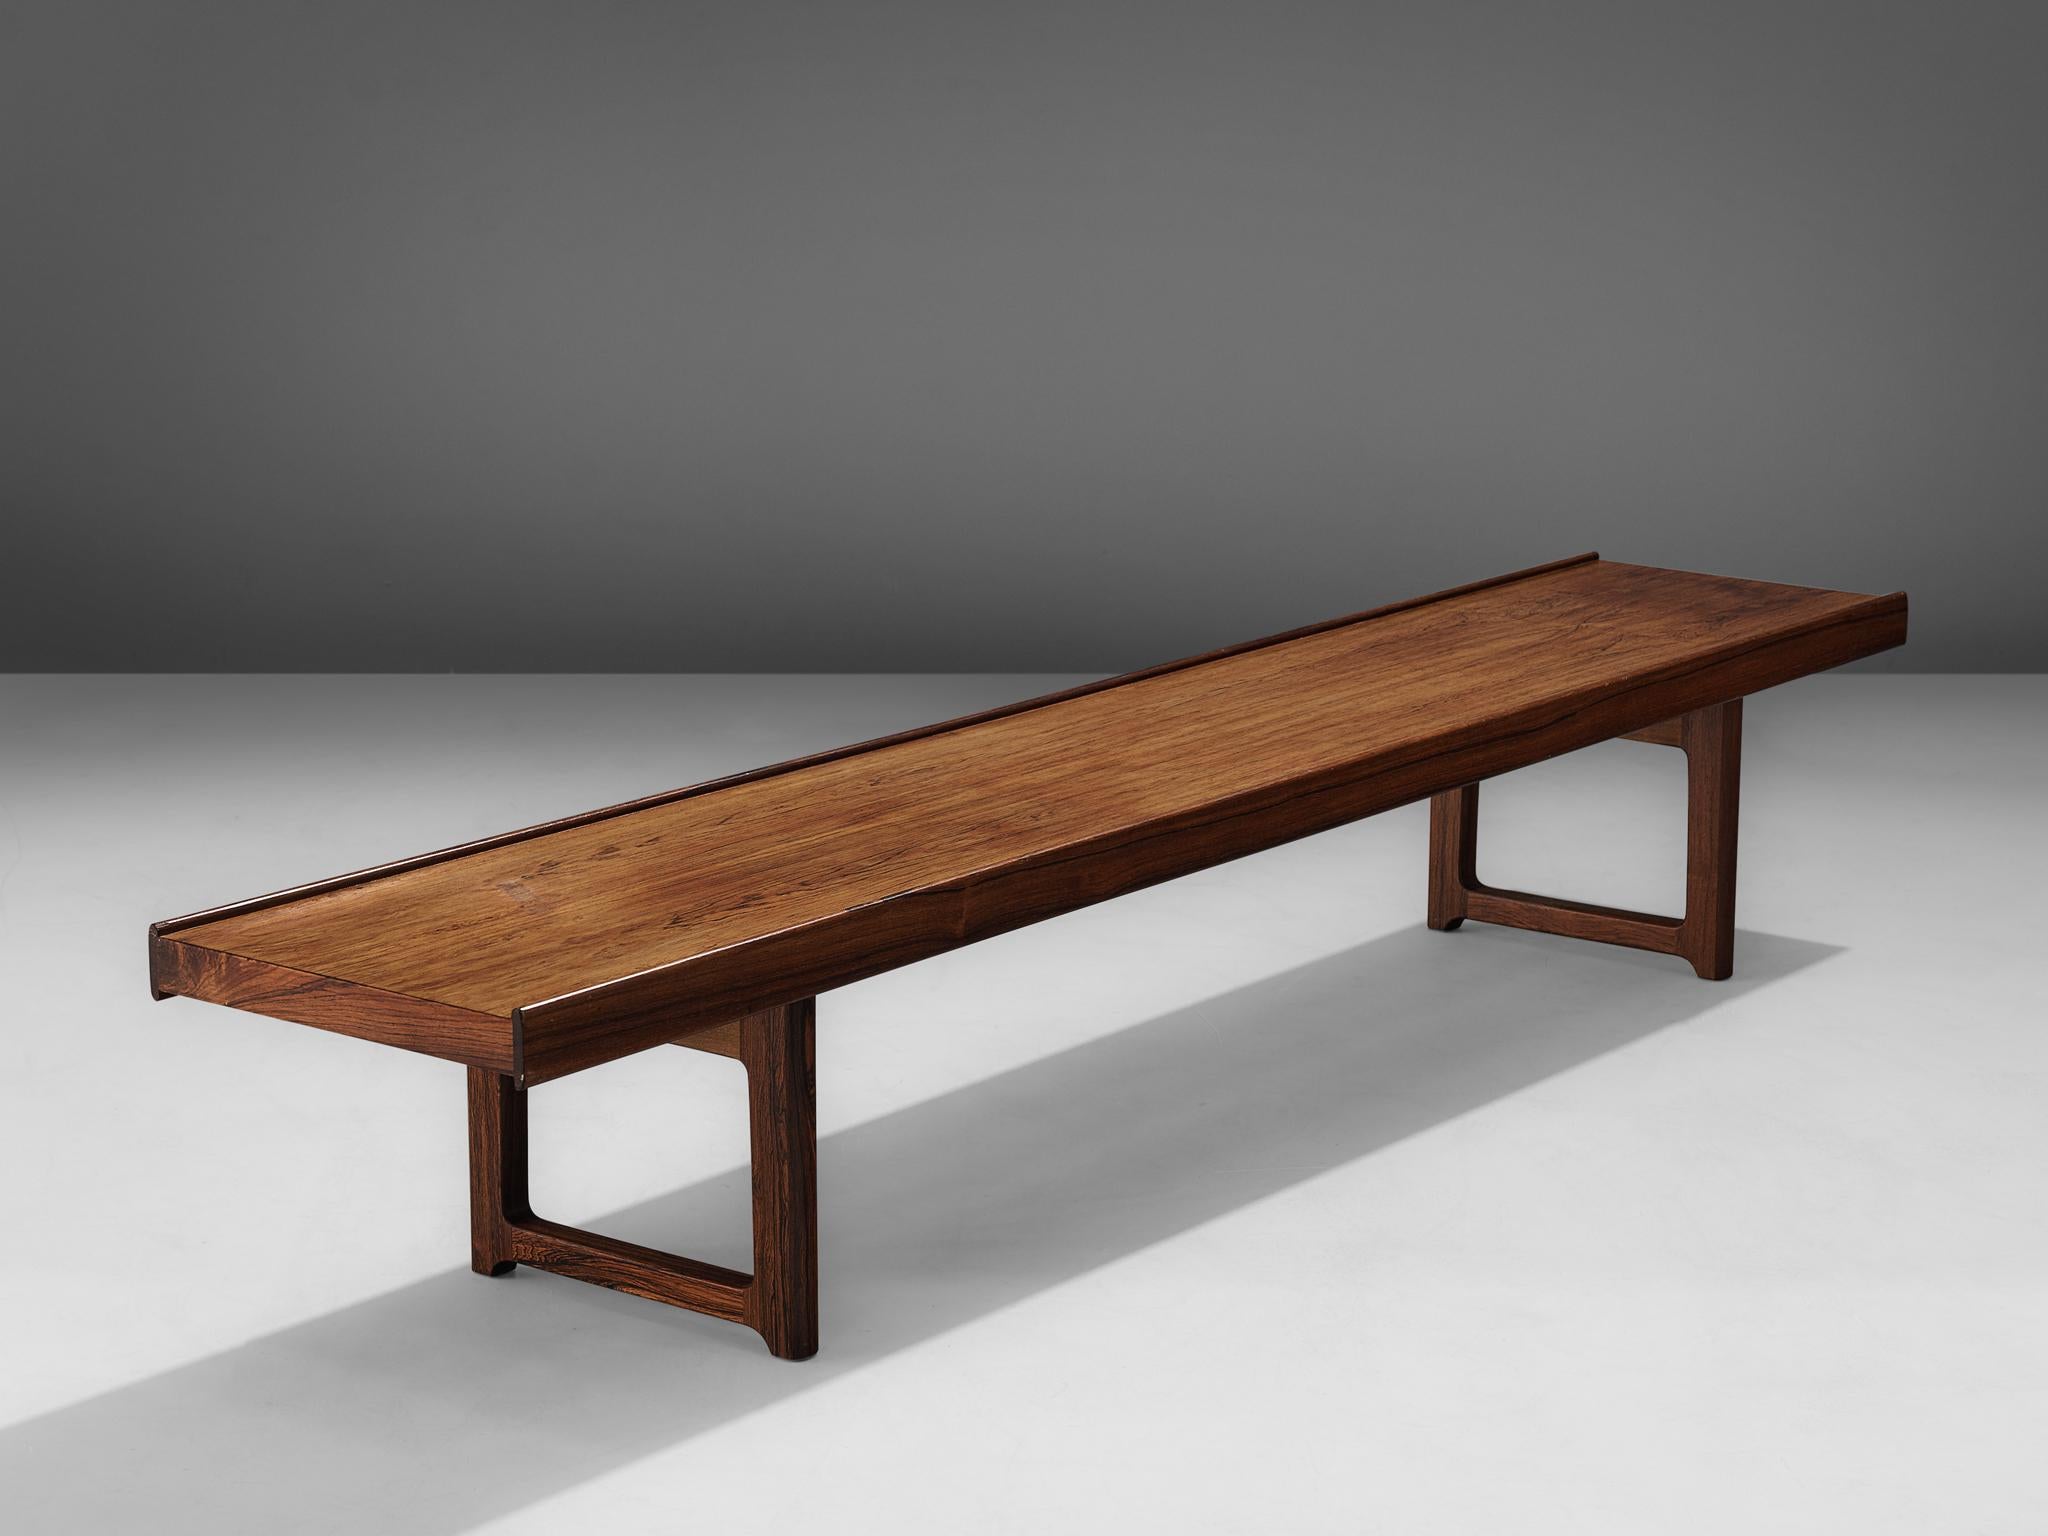 Torbjørn Afdal for Burksbo Mellemstrands Trevareindistri Norway, 'Krobo', side table or bench, rosewood, Norway, 1960s. 

The 'Krobo' bench by Afdal is made out of rosewood the piece is one of the Classic Norwegian designs of the 1960s. It has two